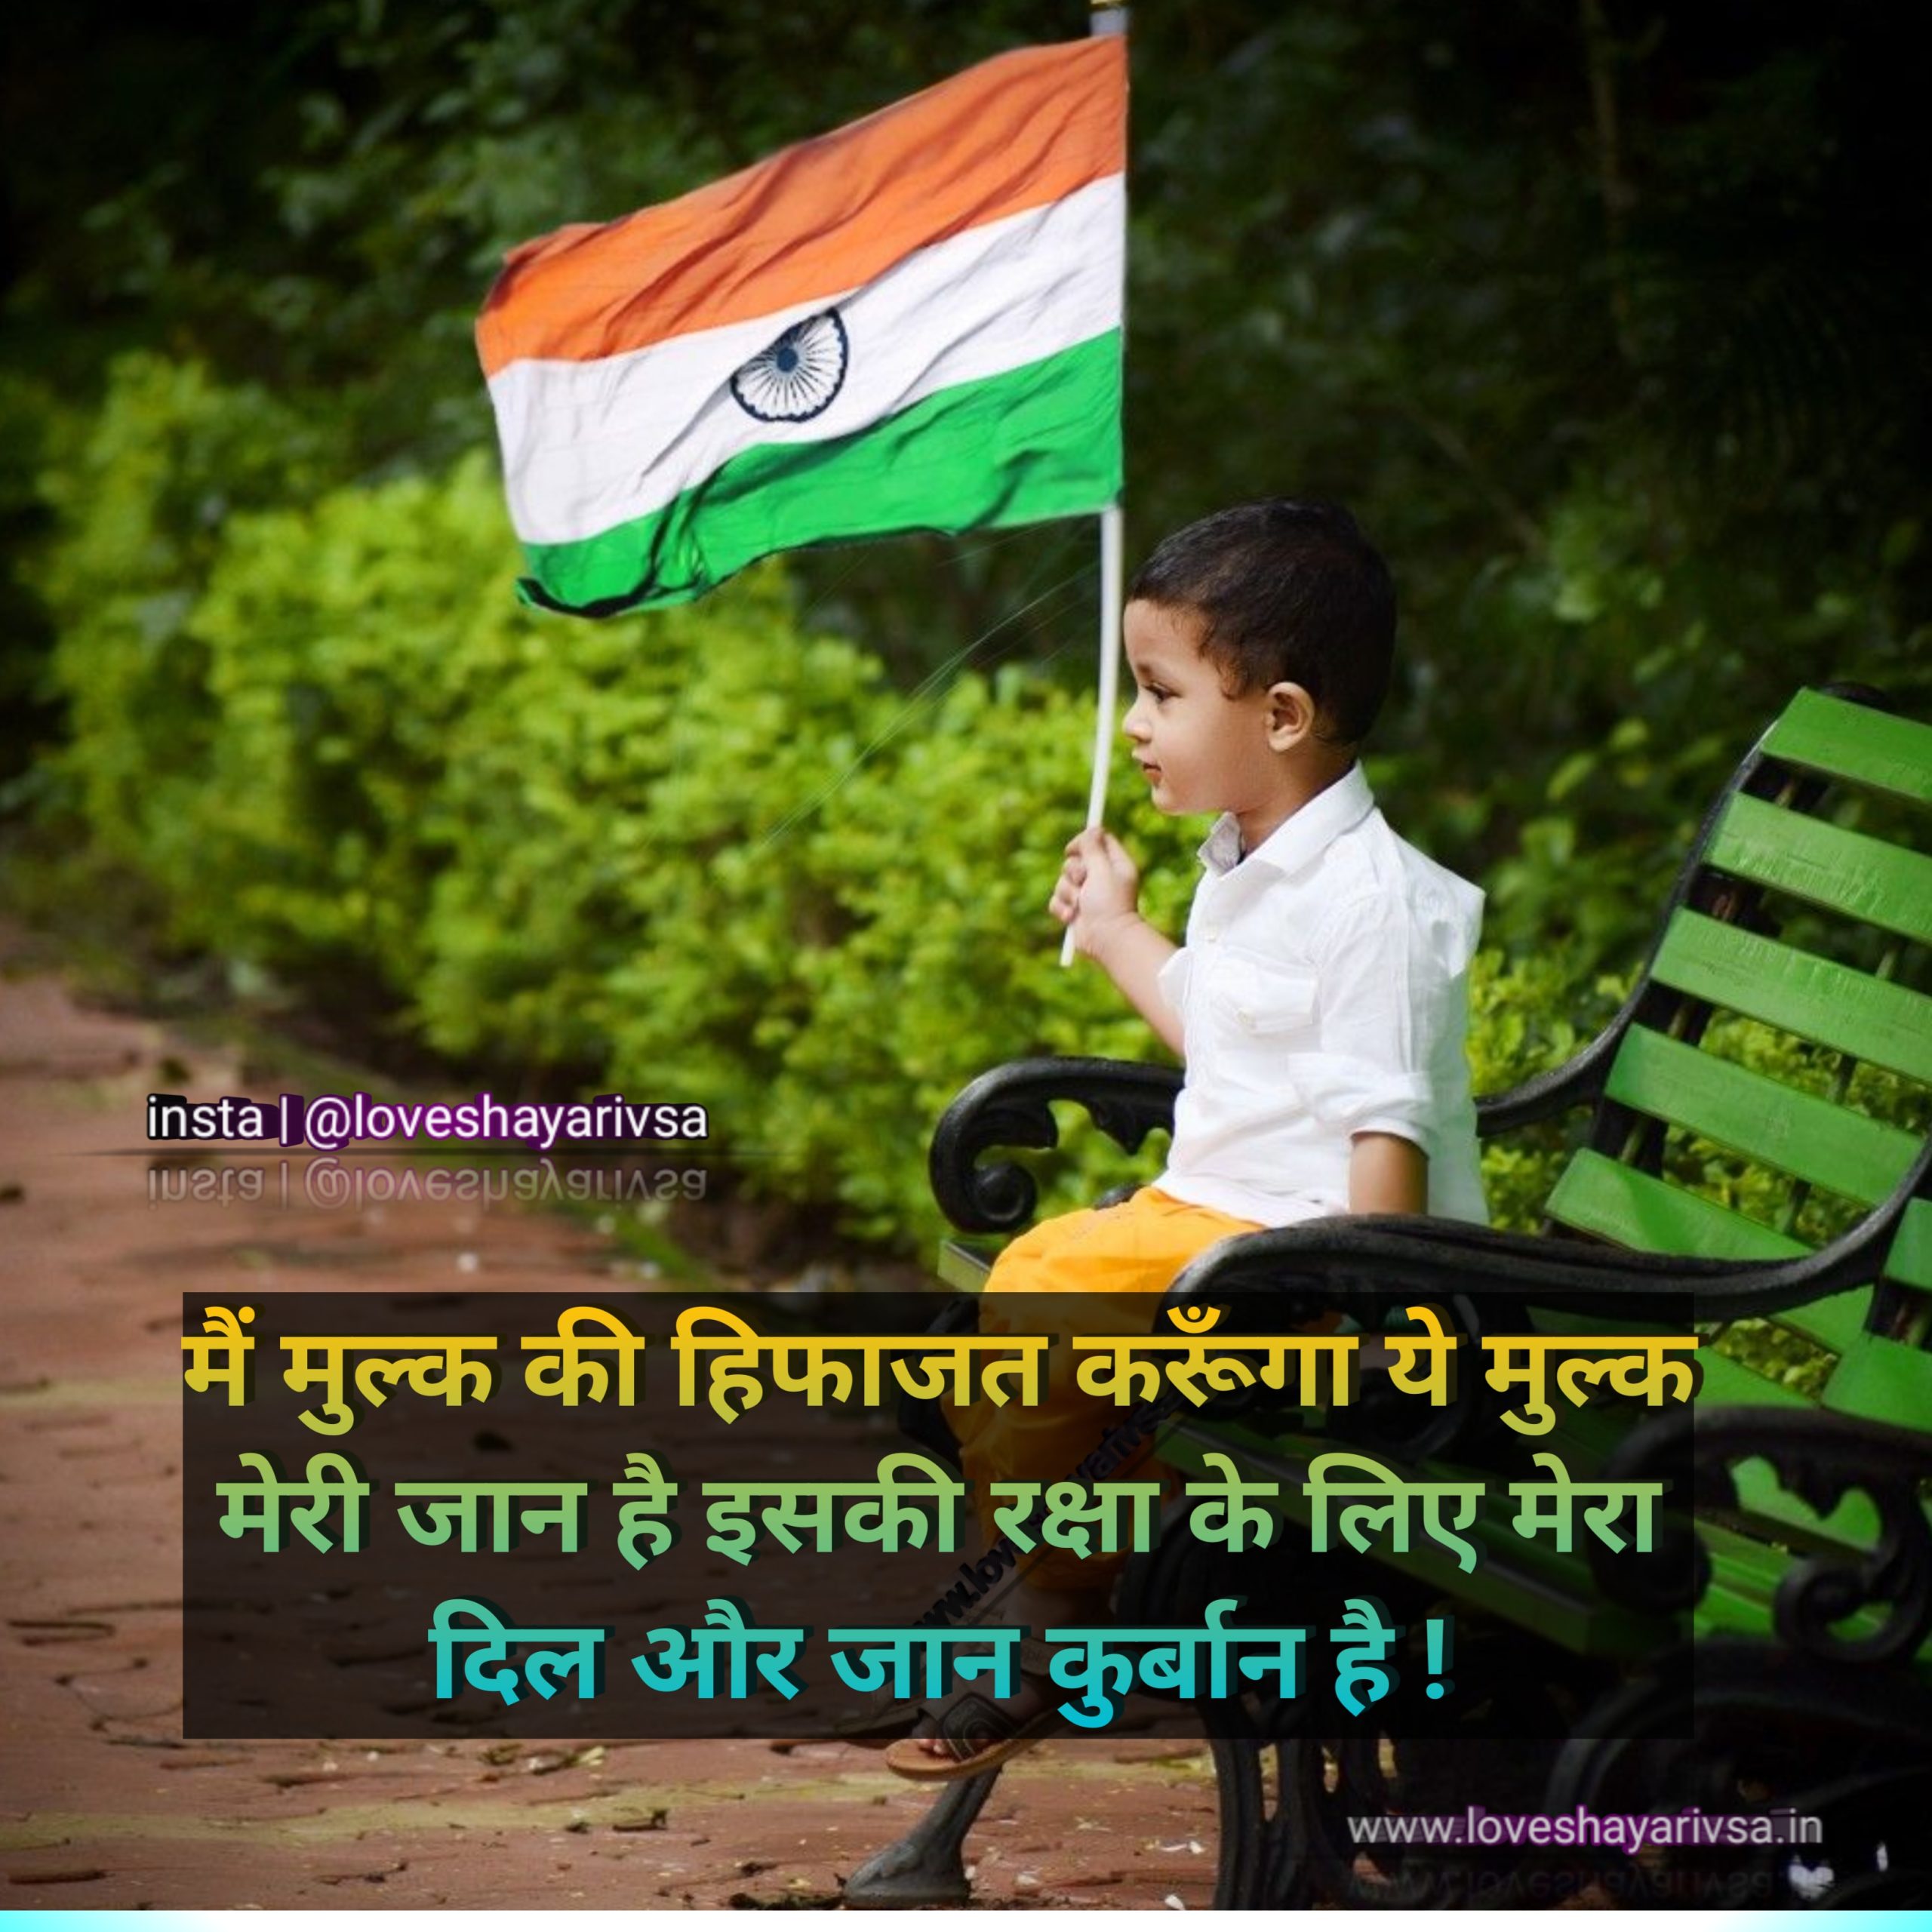 "A Young Boy Wrapped in the Tricolor, Standing Tall as a Symbol of India's Bright Future and Aspirations on Independence Day ðŸ‡®ðŸ‡³âœ¨ #PatrioticYouth #FutureLeaders"